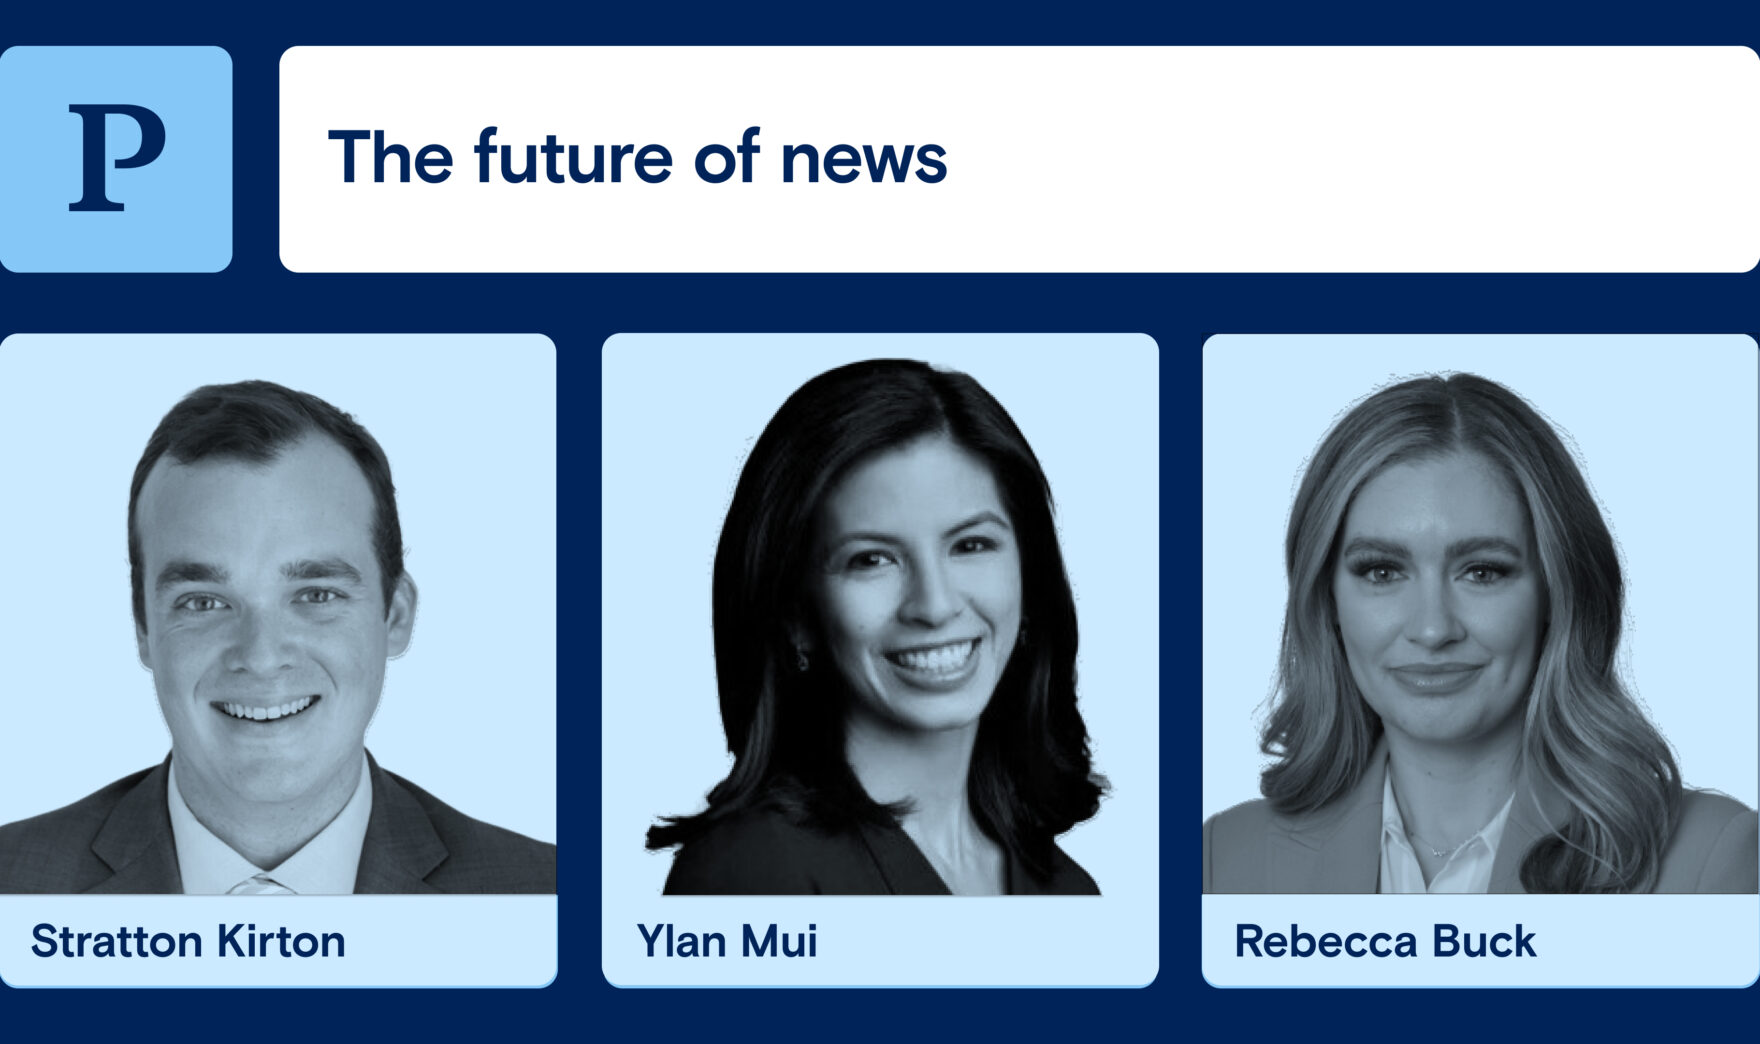 The future of news